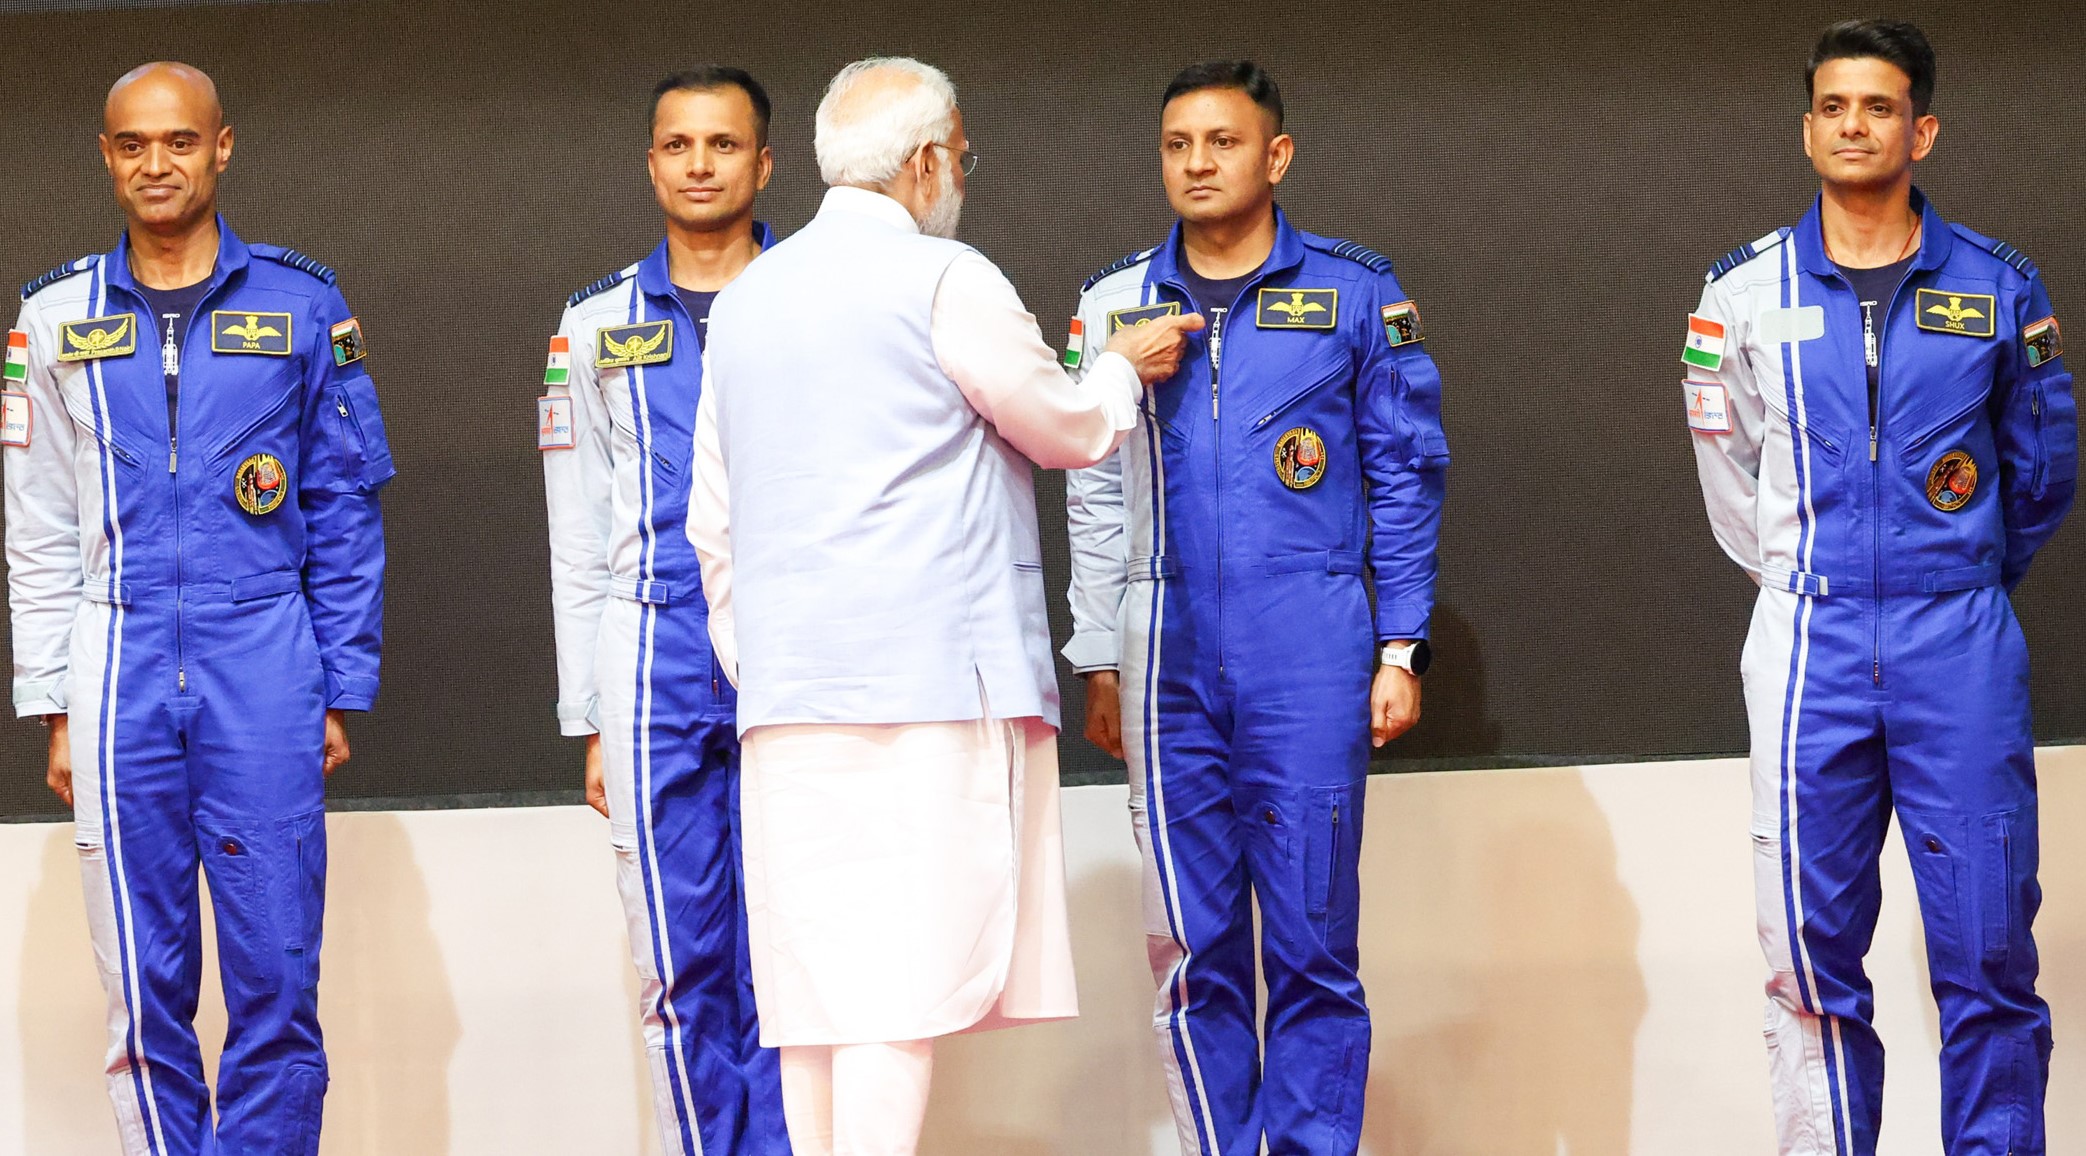 PM Modi Visits VSSC, Reviews Gaganyaan Mission, bestows ‘astronaut wings’ to the astronaut-designates.